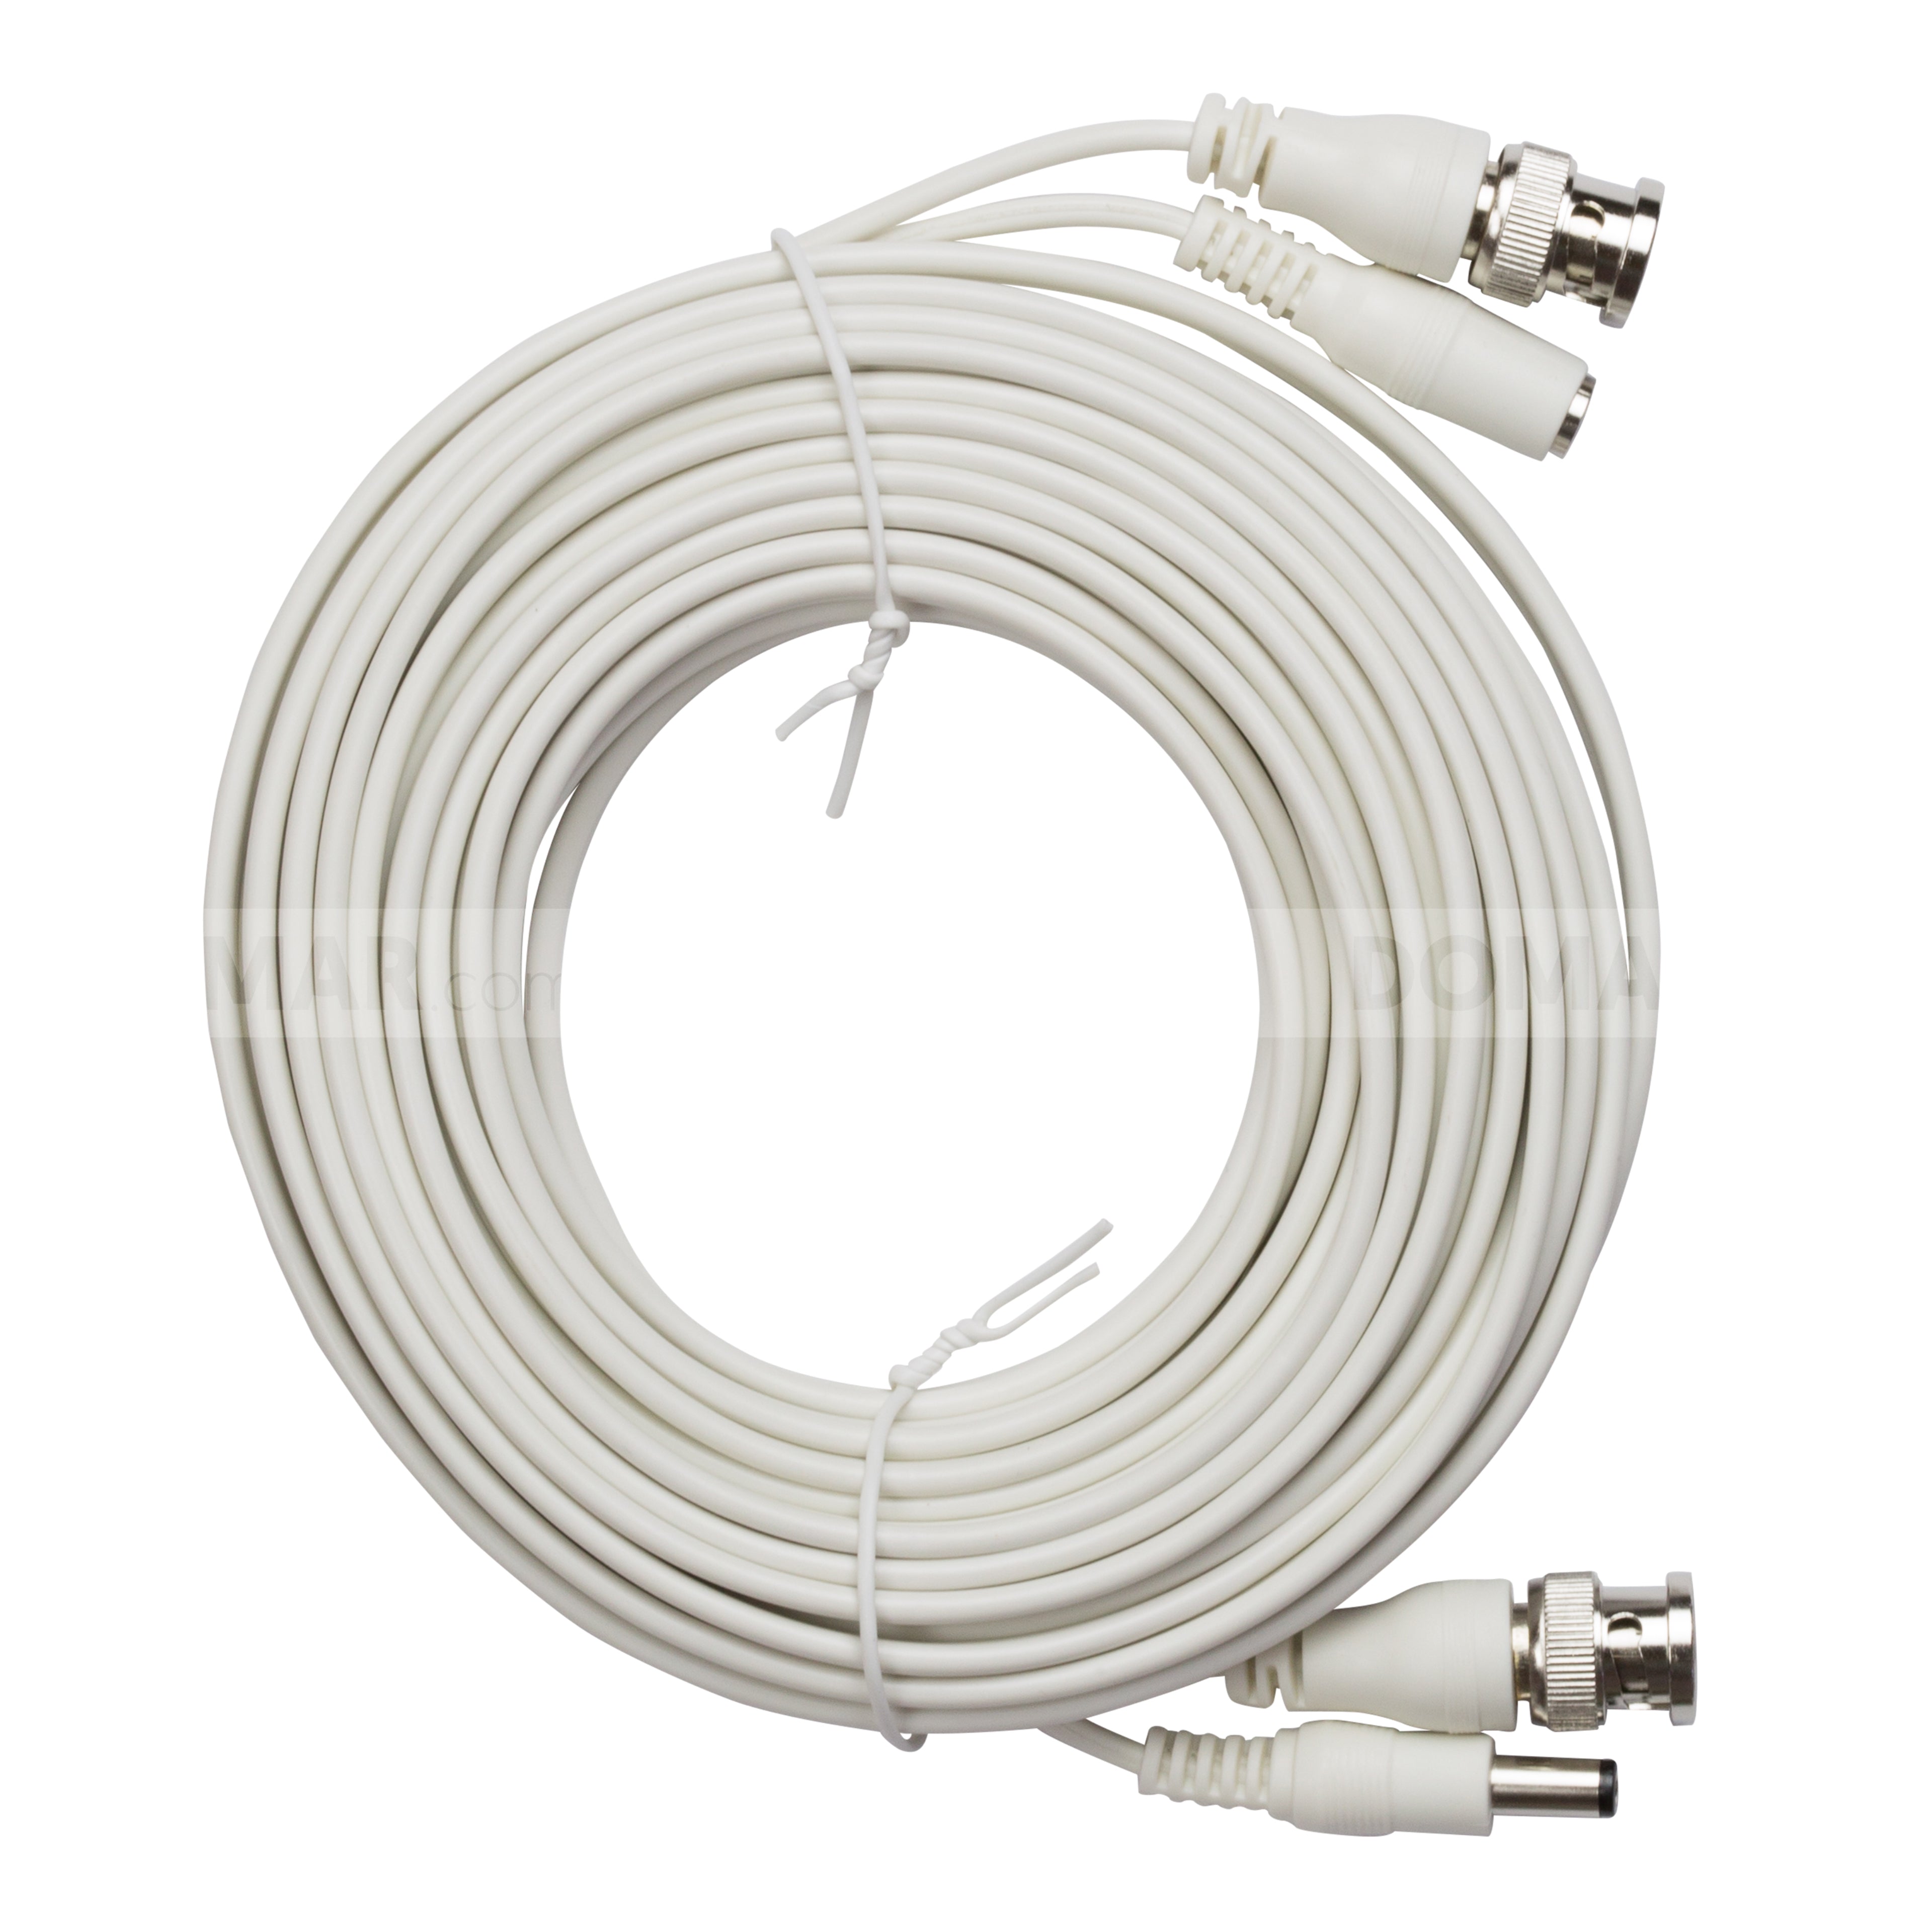 Zxtech 10M White Pre-Made RG59 Siamese Cable